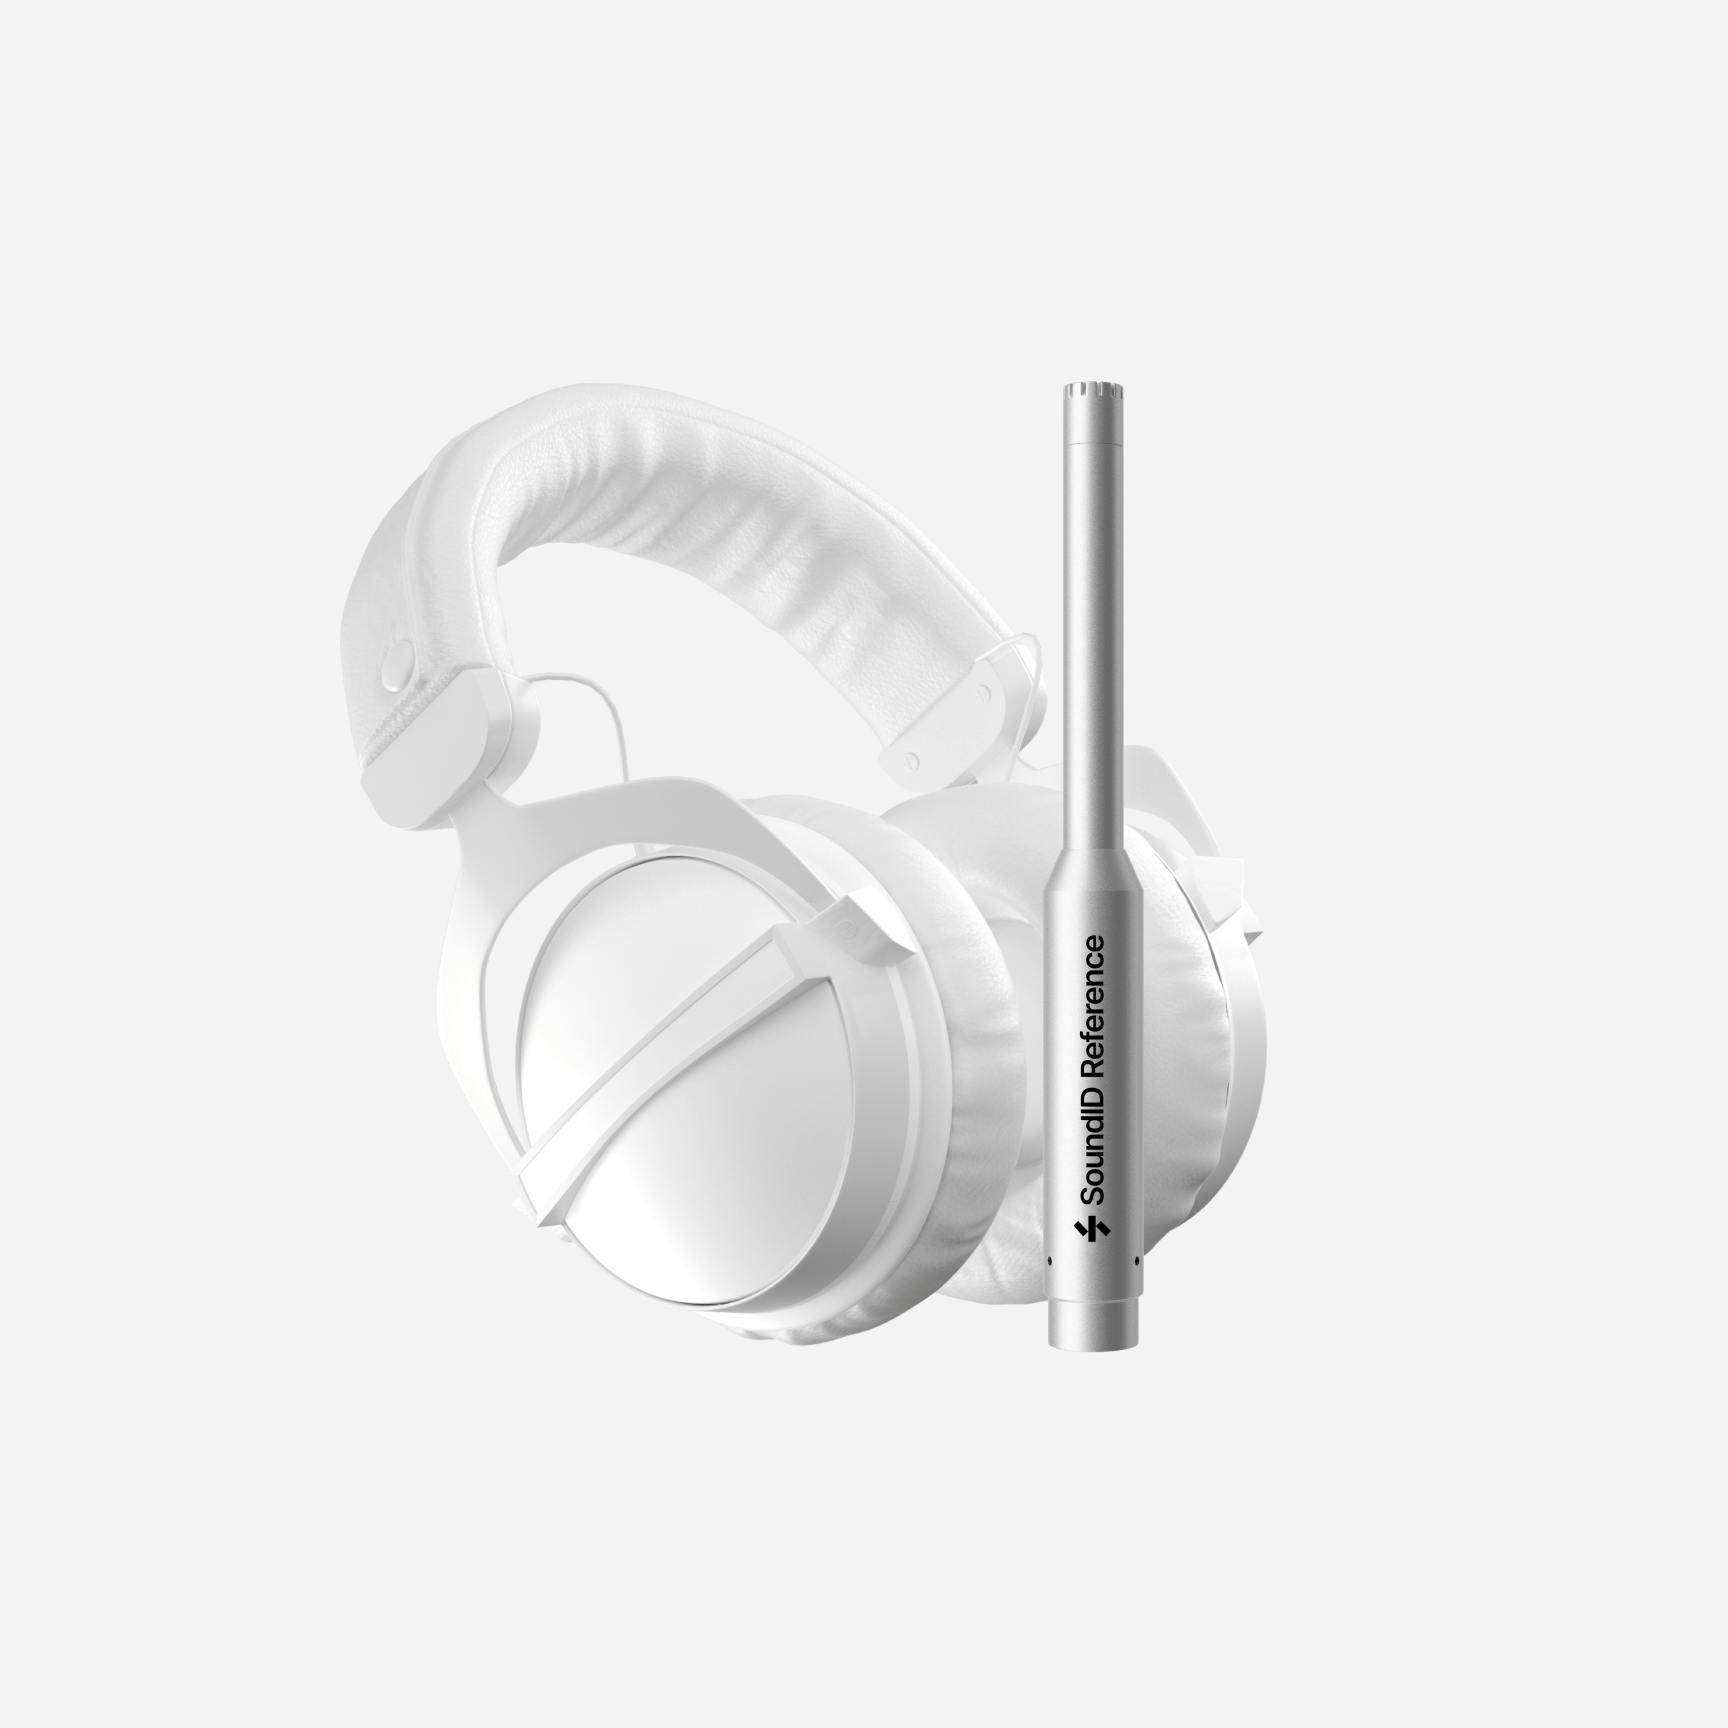 White headphones and SoundID Reference measurement microphone